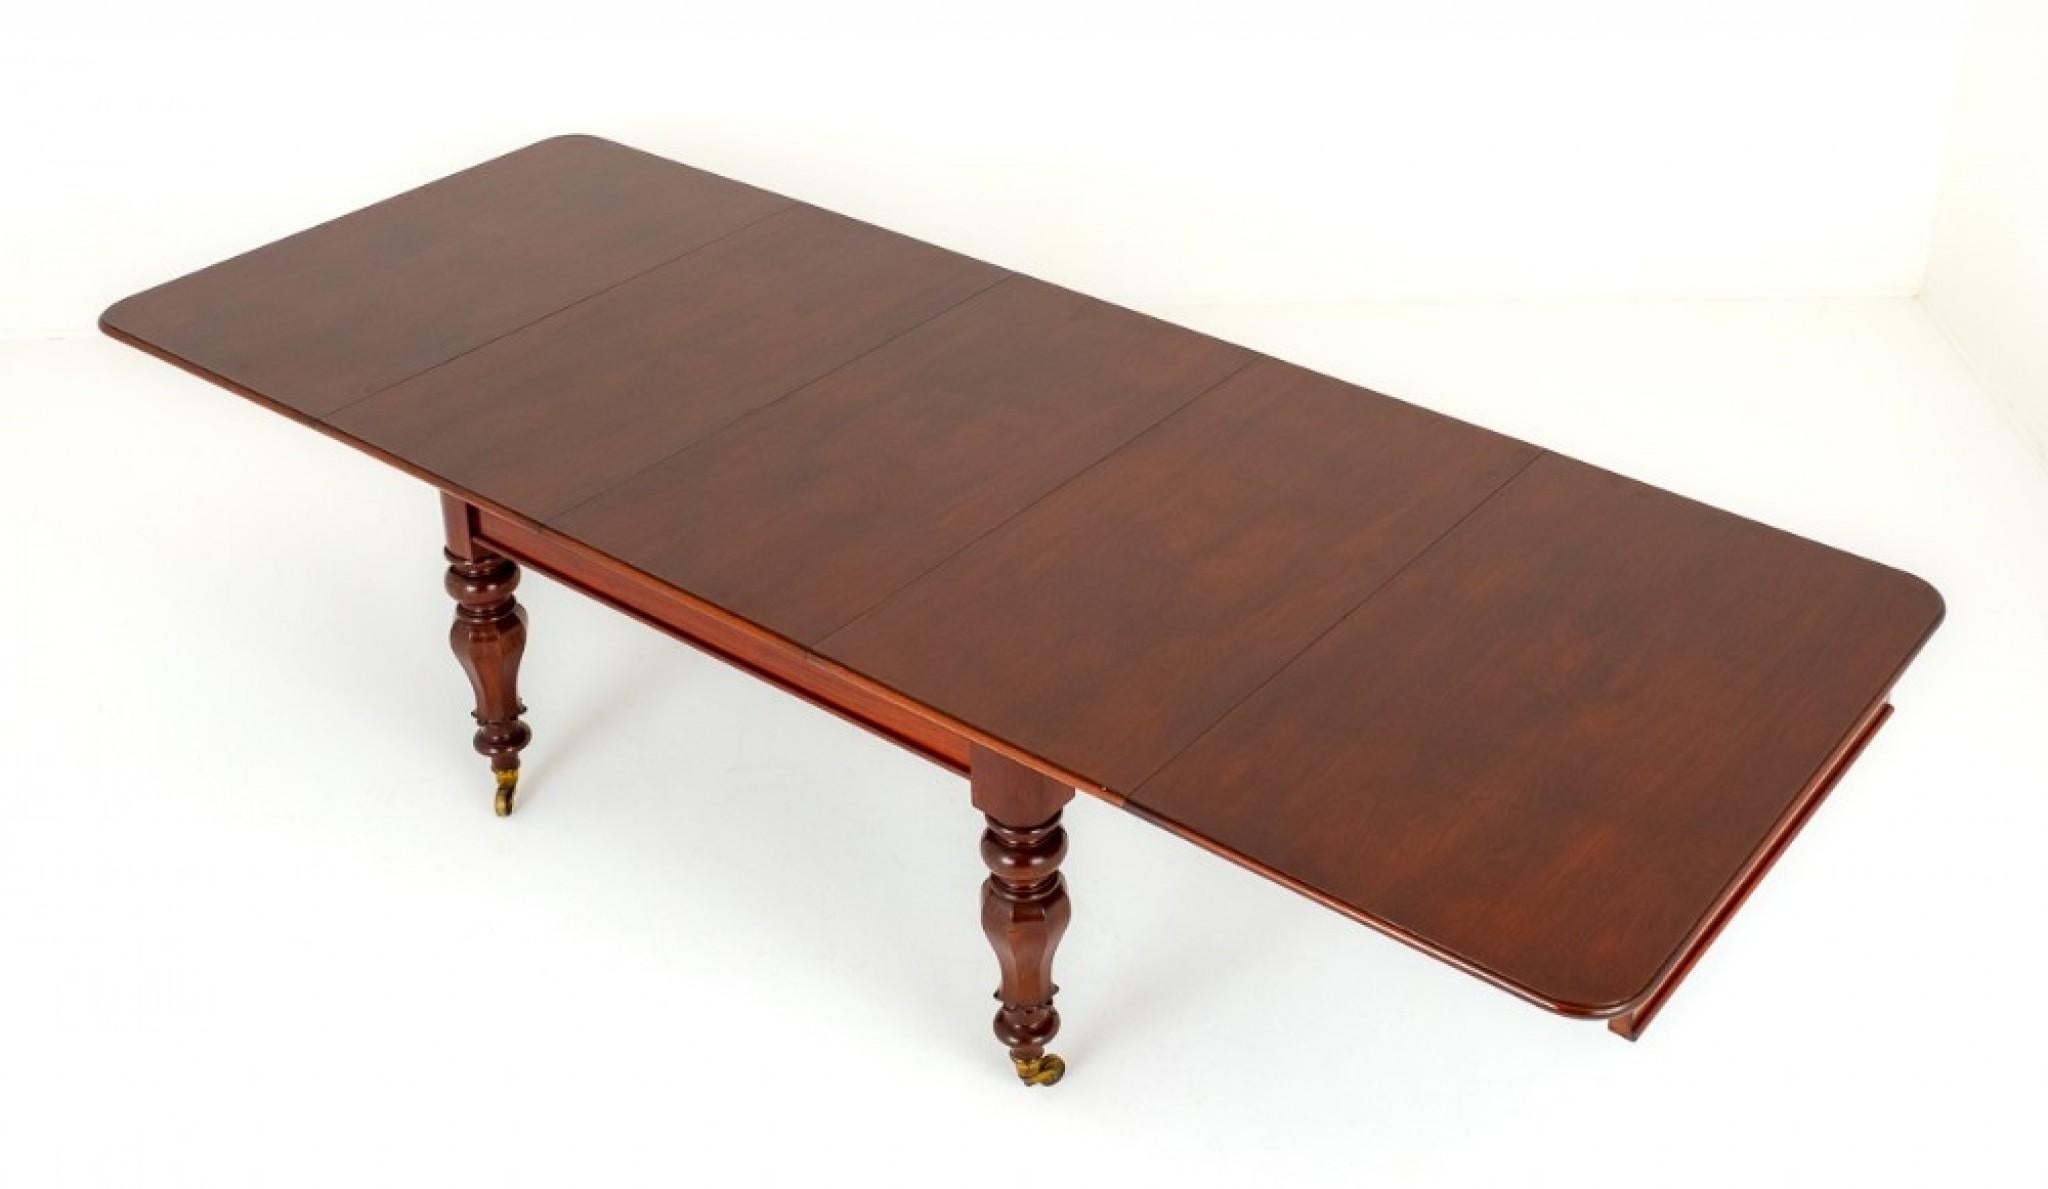 William IV mahogany Extending Dining Table.
This Table is Raised upon Octagonal and Ring Turned Legs with Original Brass Castors.
Circa 19th century
The Table Extends by way of a Pullout Telescopic Mechanism to Accept up to 3 Extra Leaves.
Fully